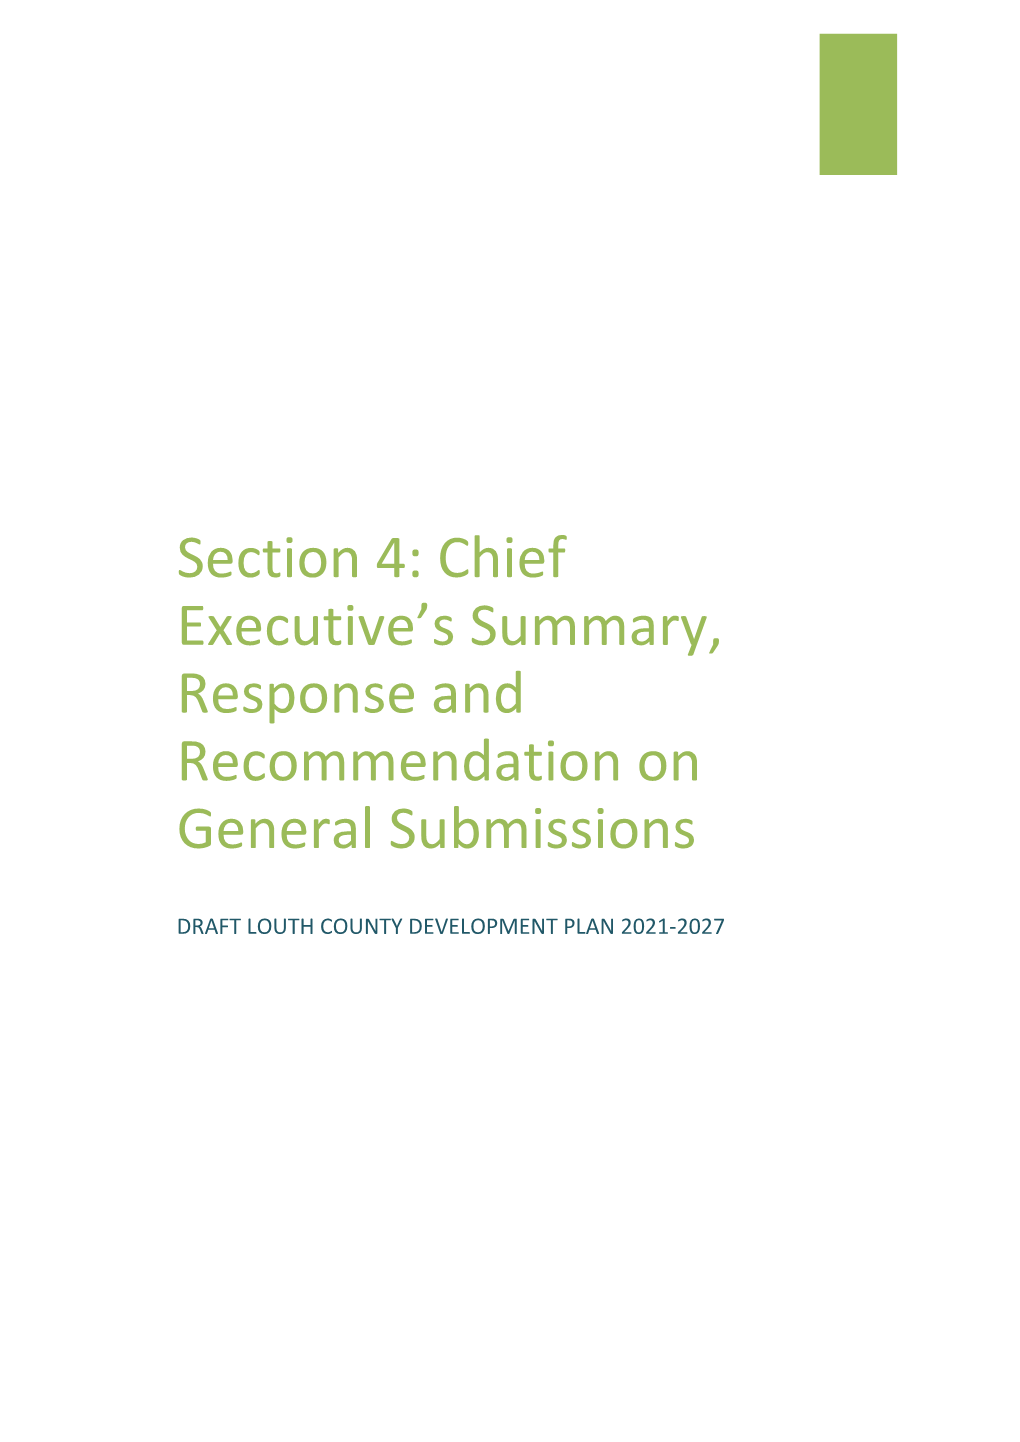 Chief Executive's Summary, Response and Recommendation